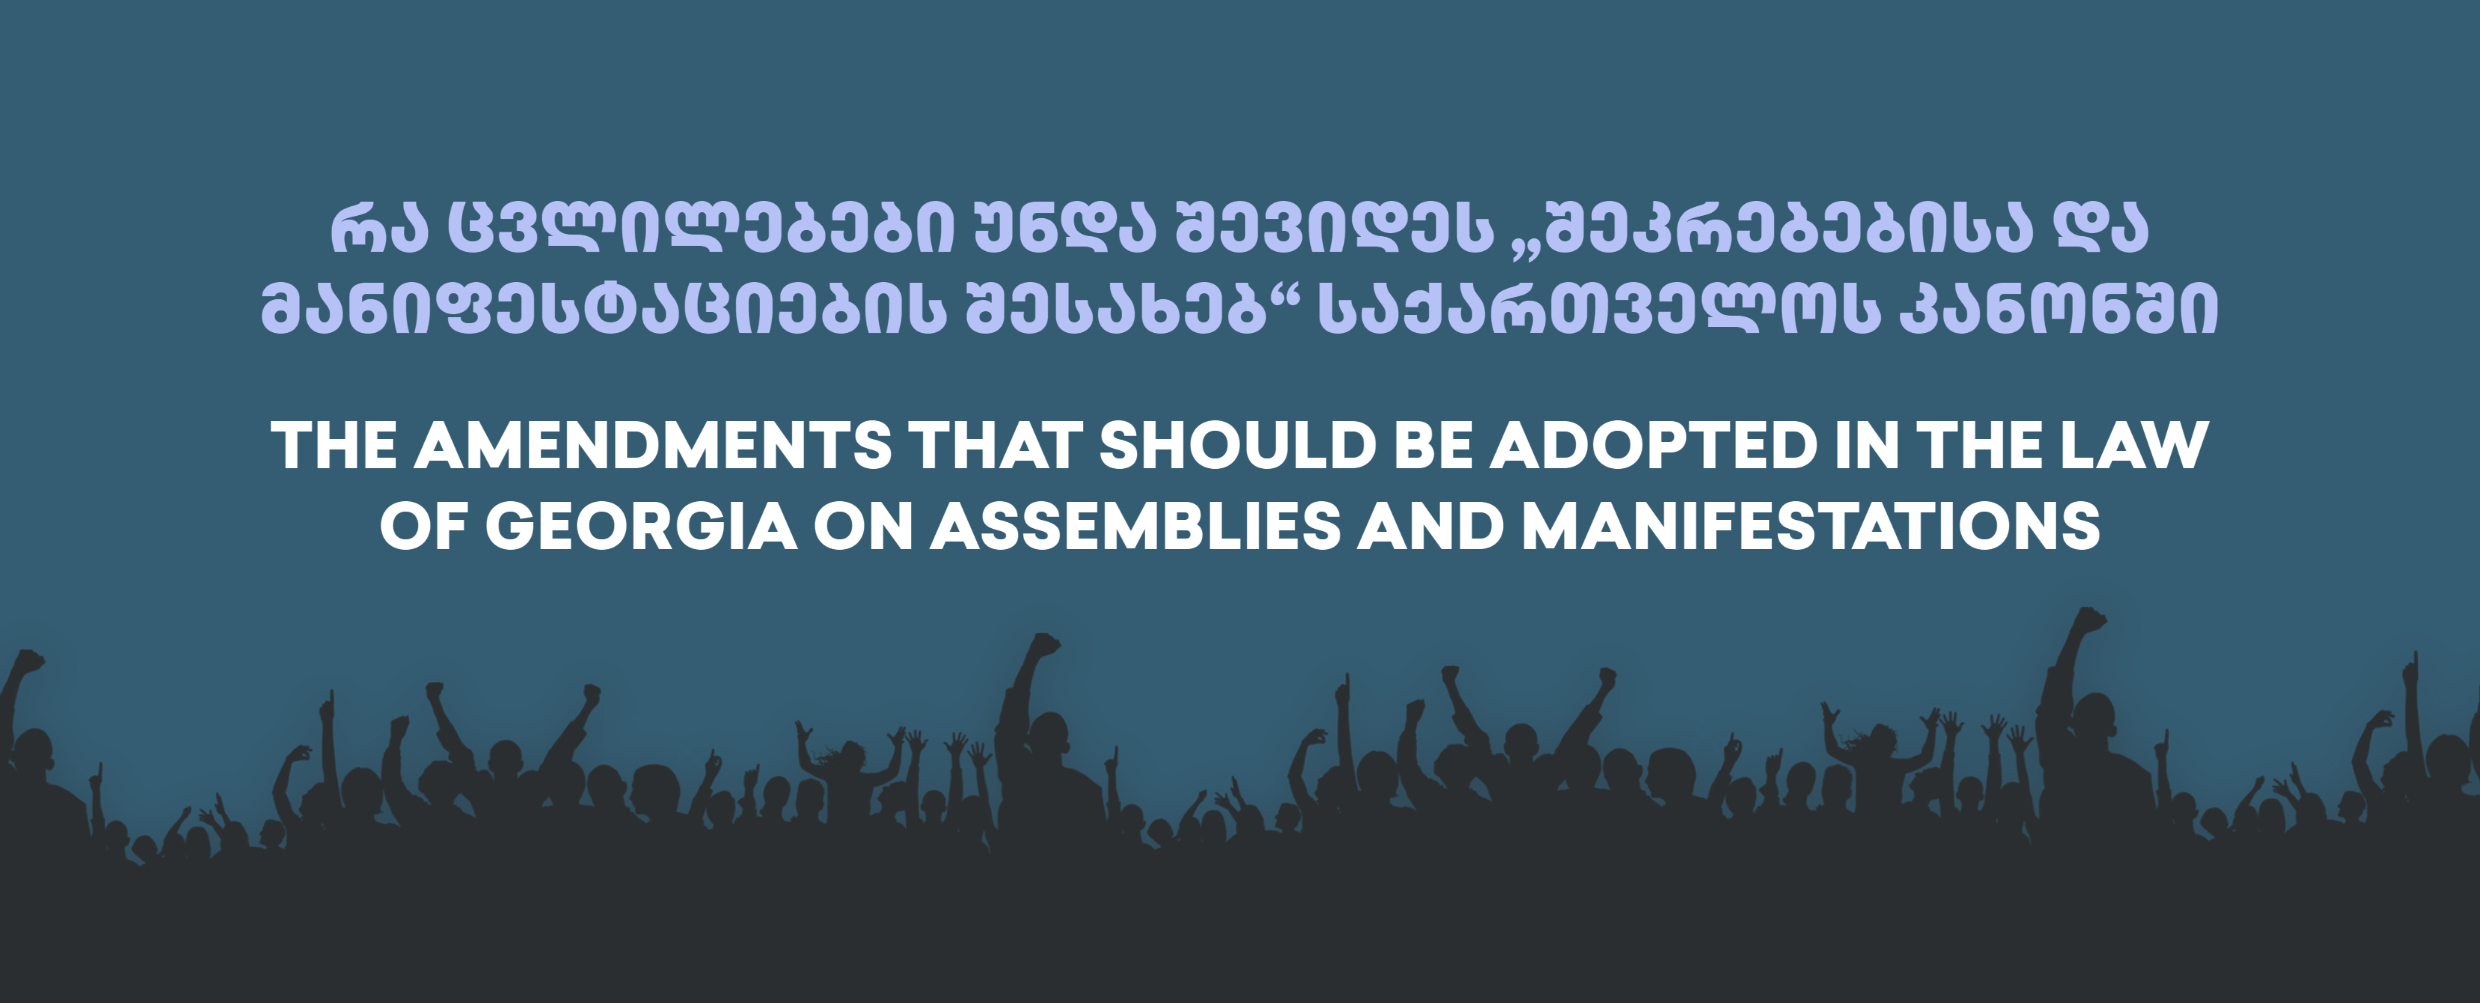 THE AMENDMENTS THAT SHOULD BE ADOPTED IN THE LAW OF GEORGIA ON ASSEMBLIES AND MANIFESTATIONS